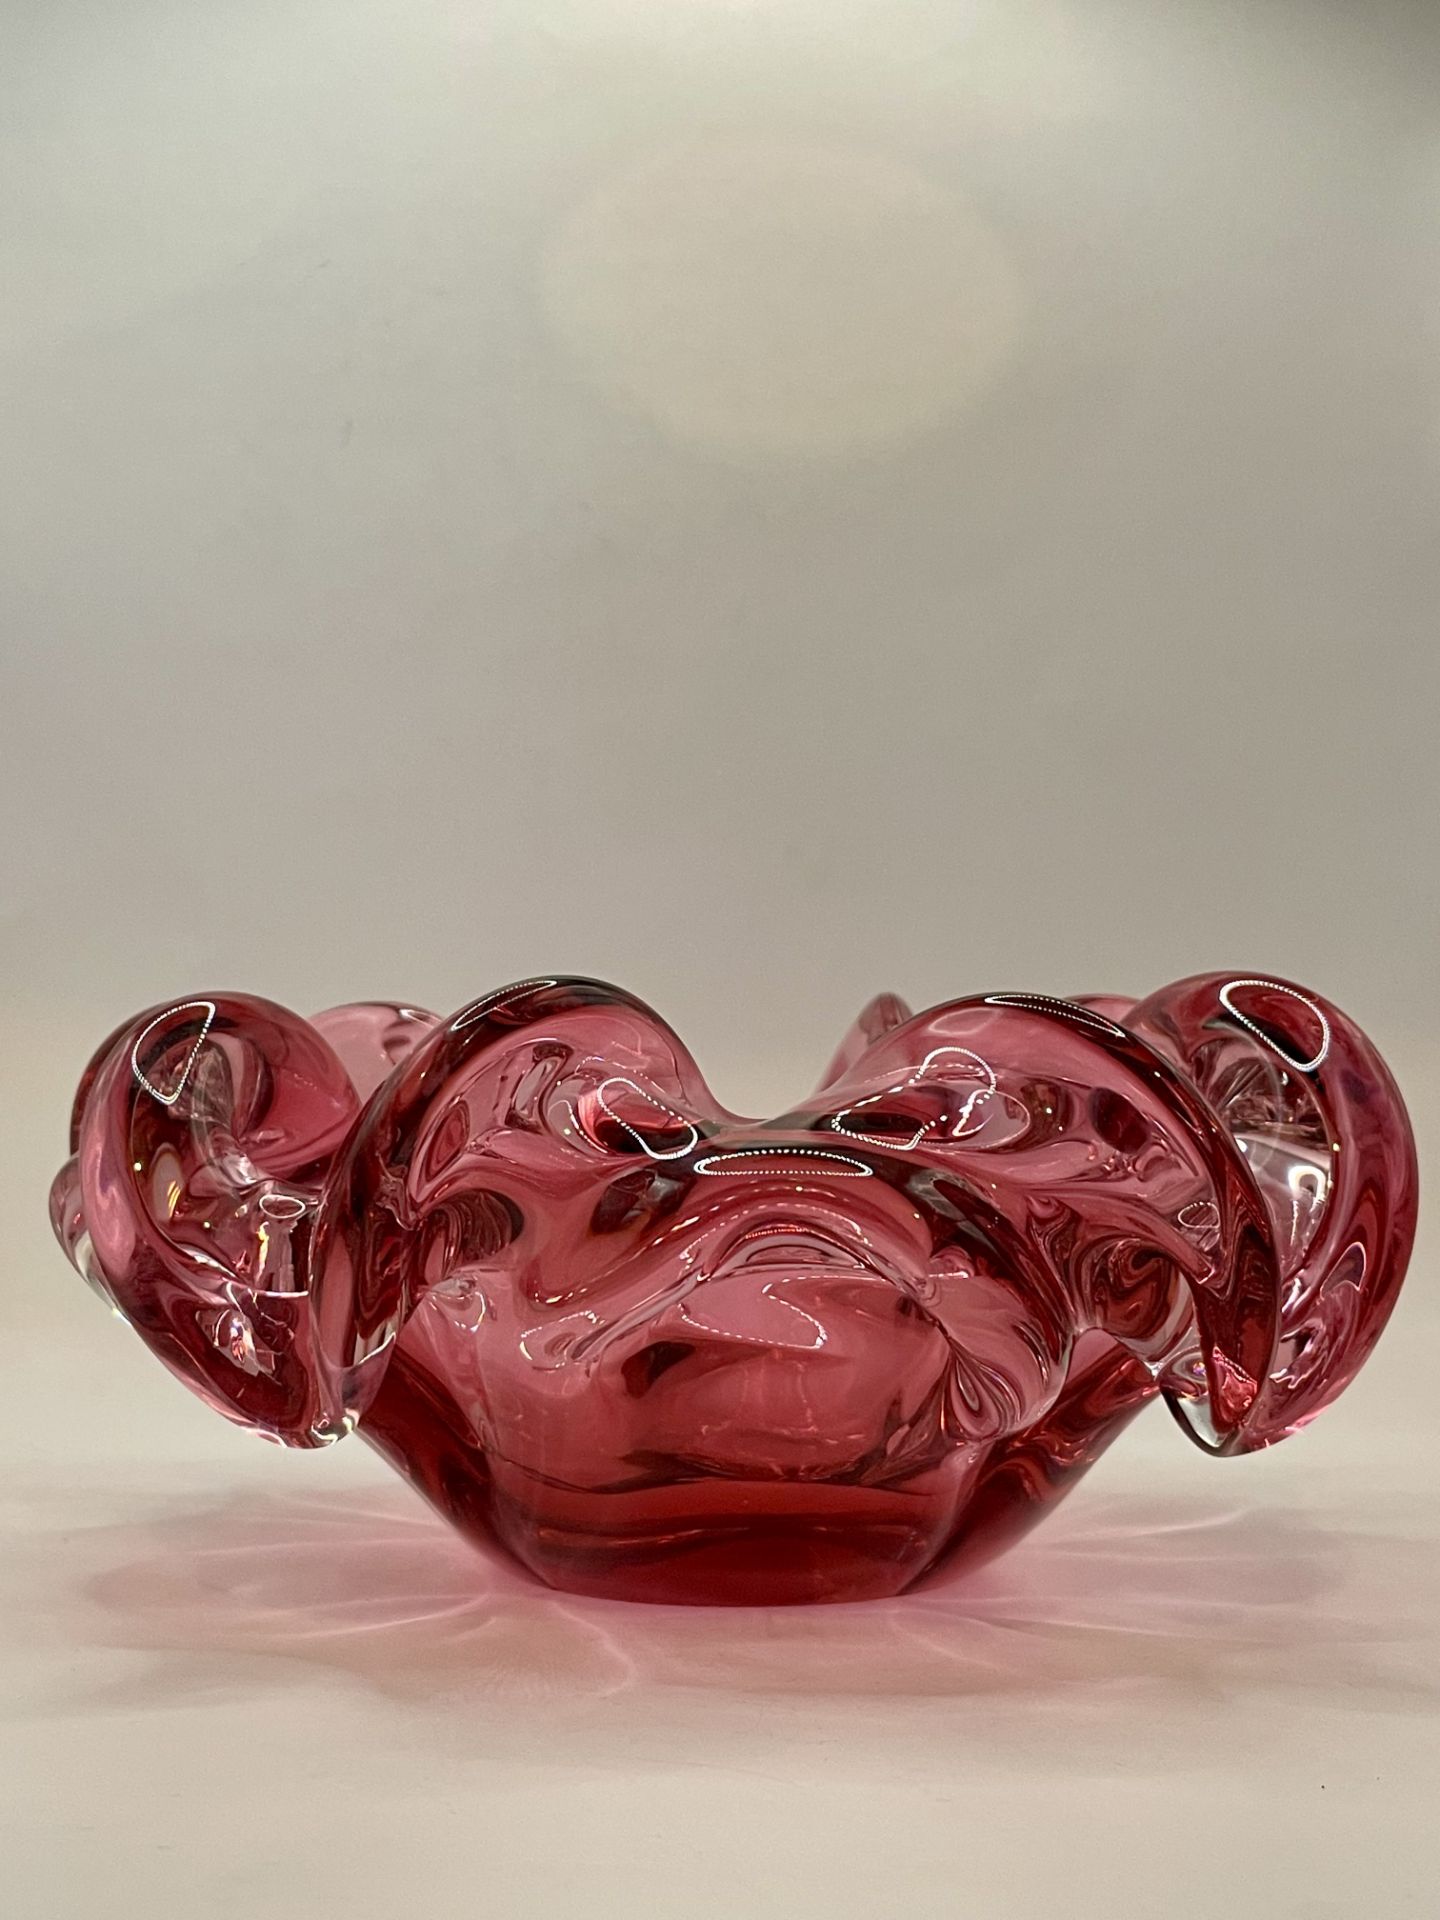 VETRI MURANO GLASS SOMMERSO CENTREPIECE BOWL RUFFLED CRANBERRY ITALY 1950'S - Image 14 of 18